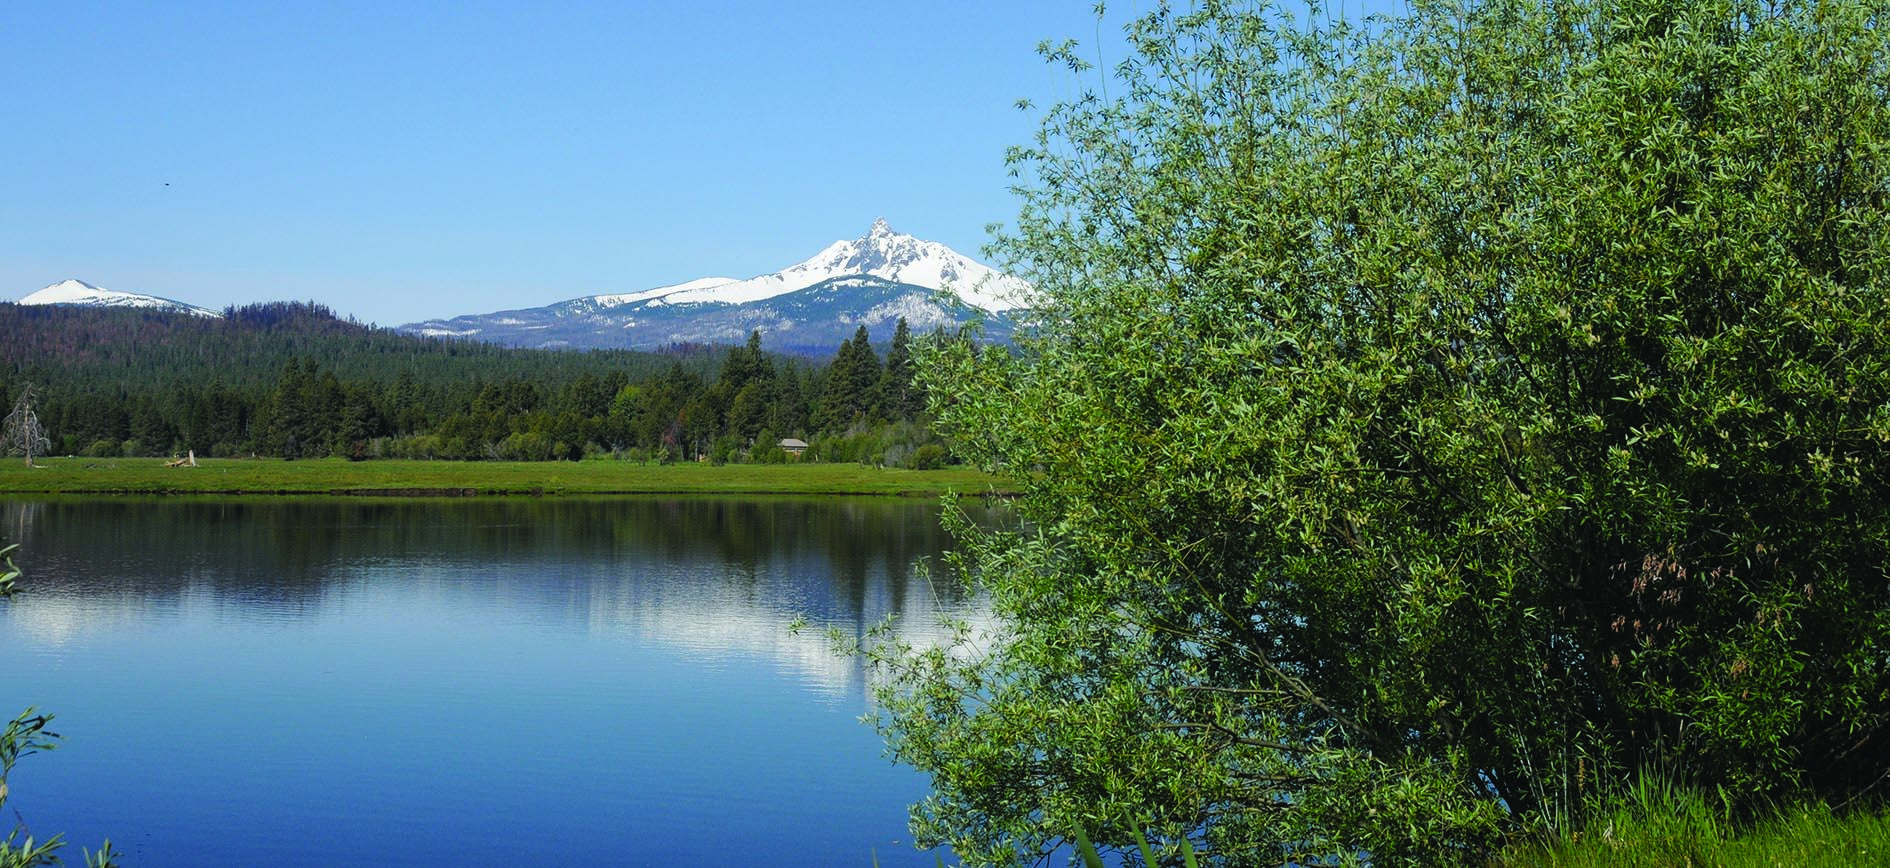 Willow foliage in front of white-topped mountain reflected in water